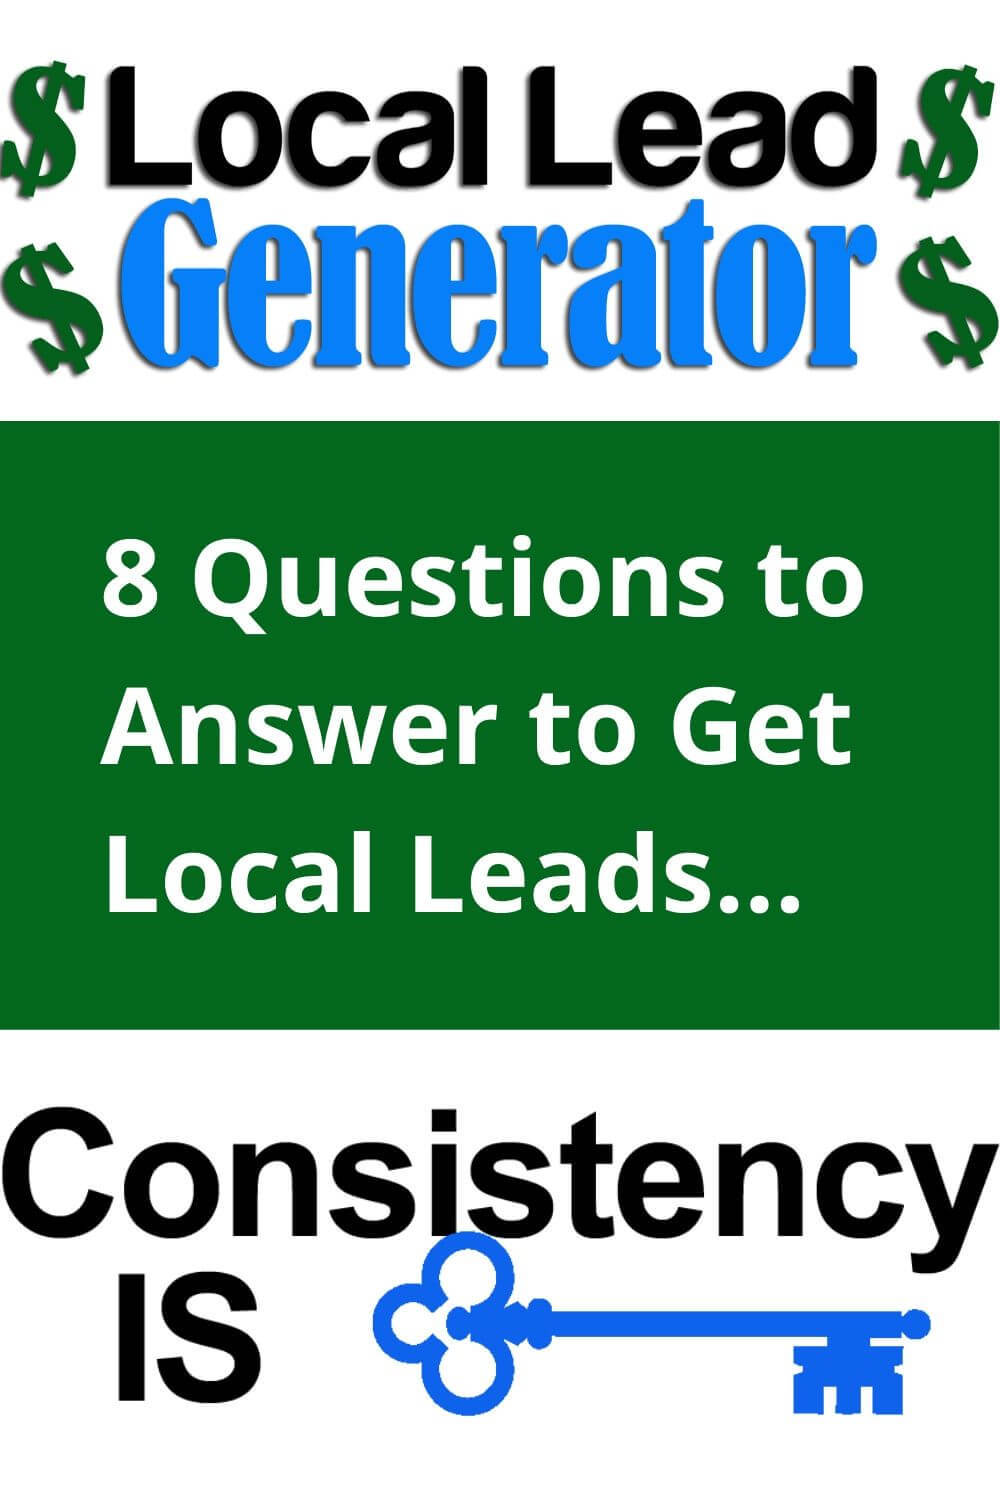 8 querstions to answer to get local leads...